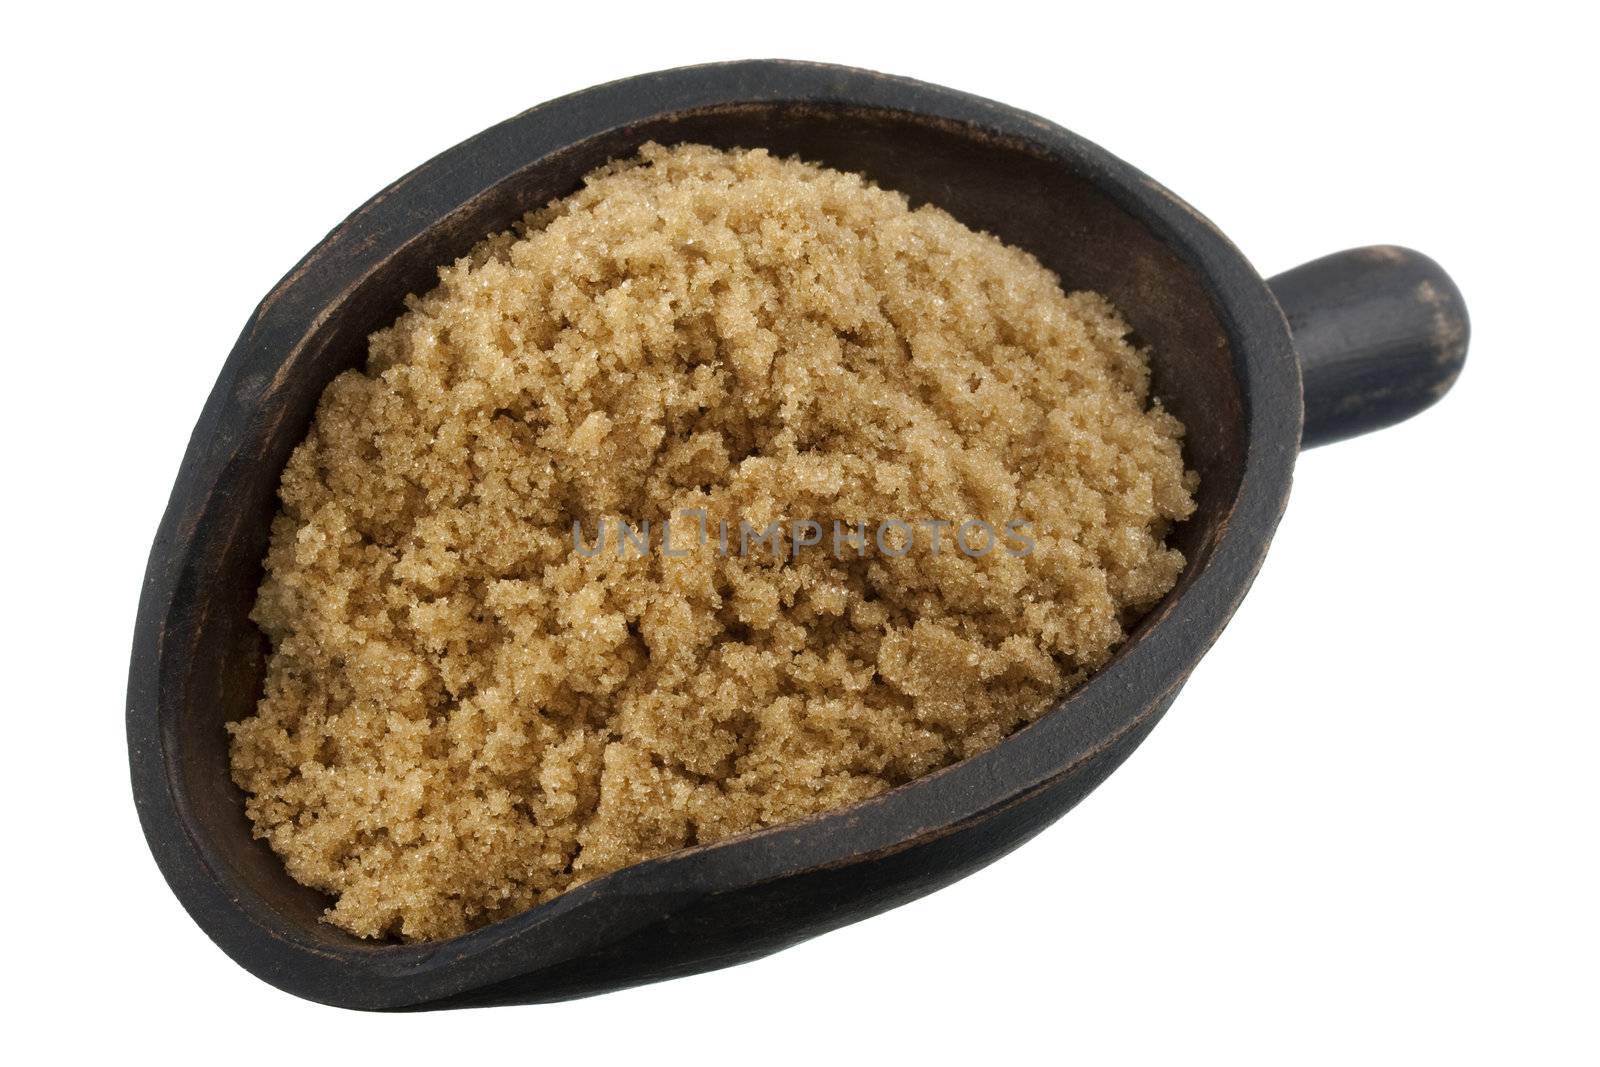 brown cane sugar on a rustic, wooden scoop isolated on white